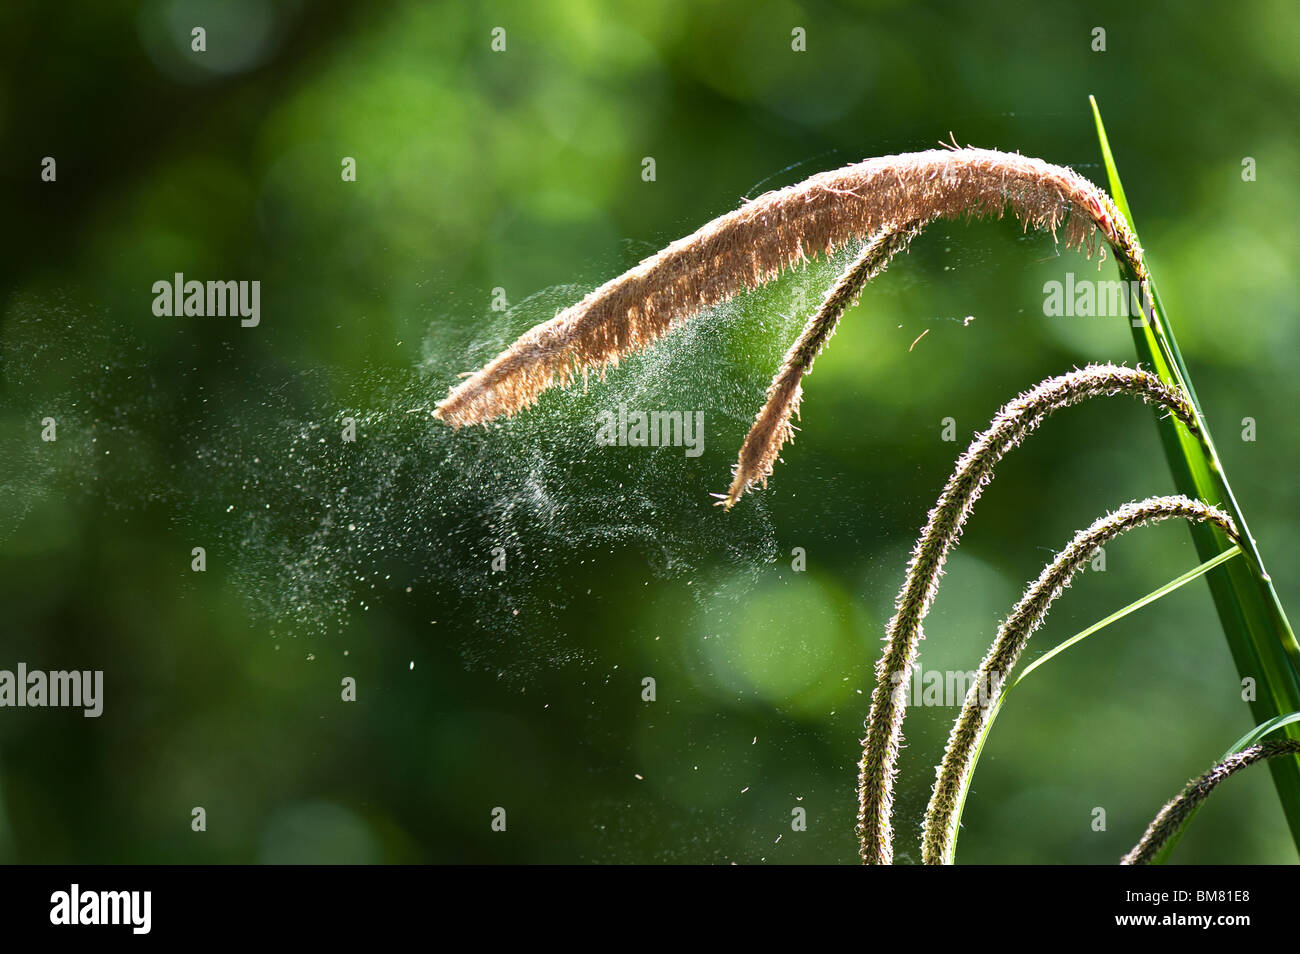 Pollen being released from Carex pendula Pendulous Sedge grass in the English countryside Stock Photo